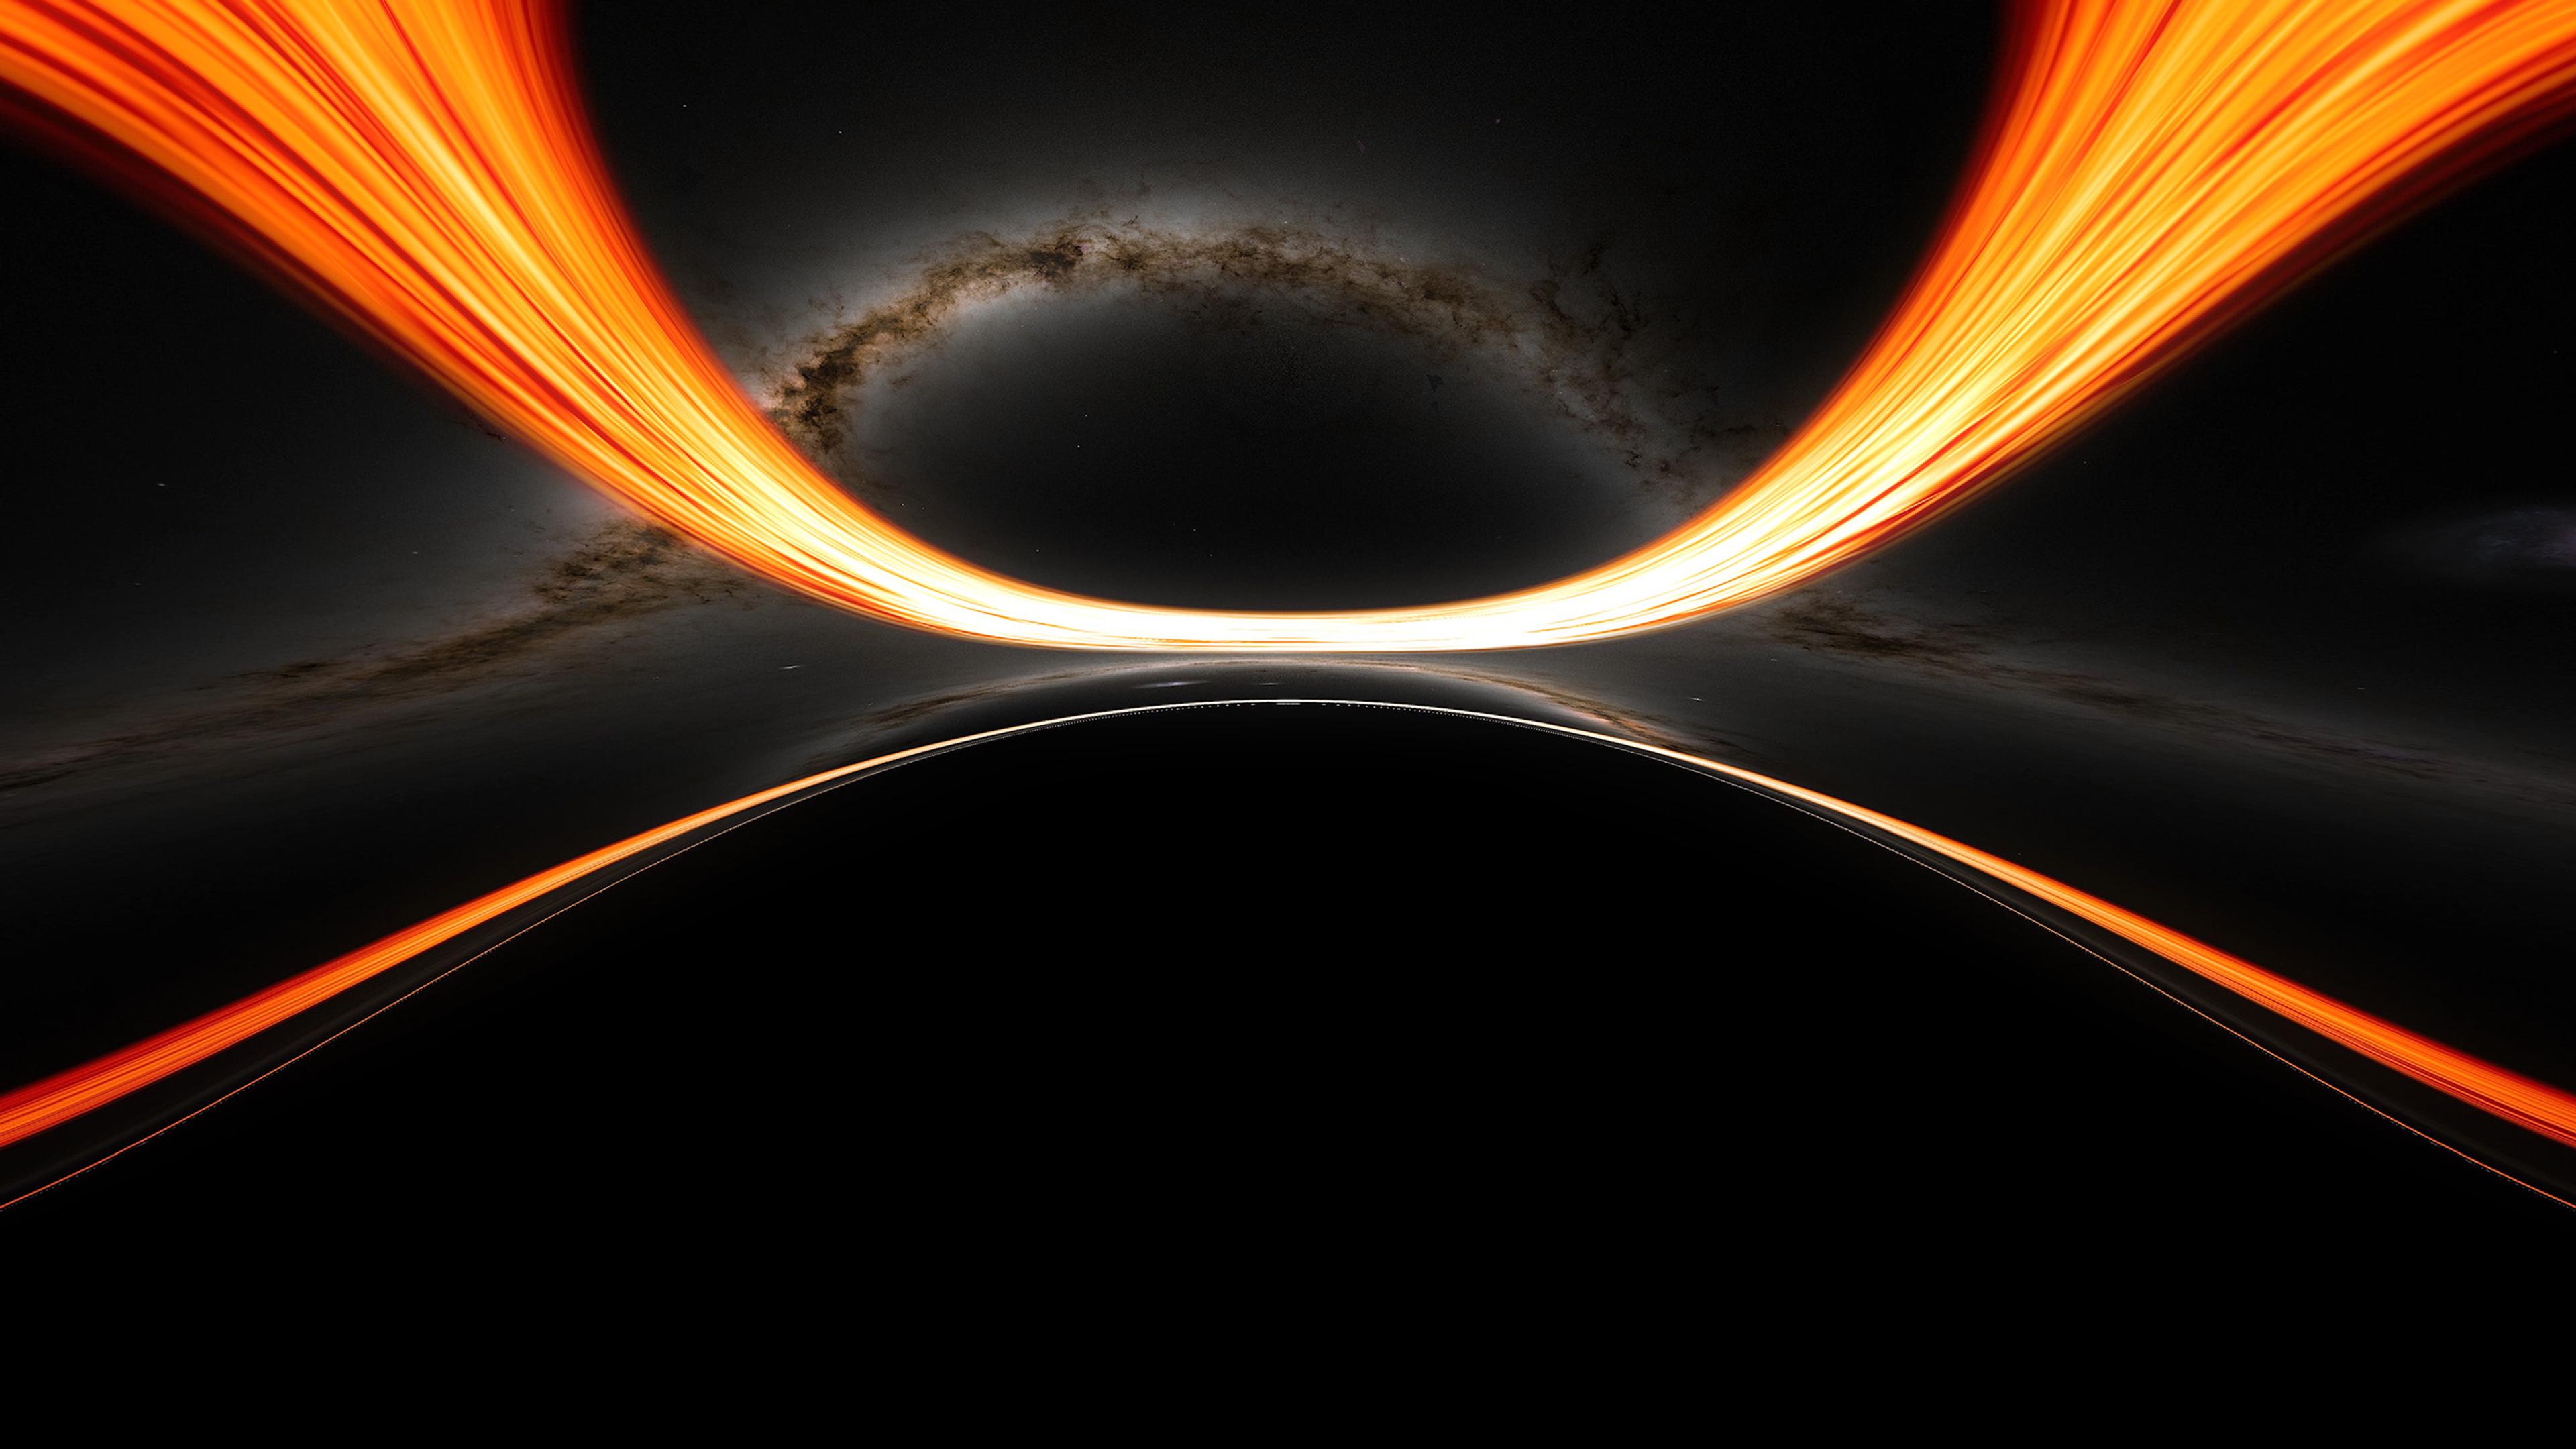 Artistic depiction of a black hole with light bending around its event horizon. A bright swirl of light contrasts against the dark background, illustrating the gravitational pull and bending of light.